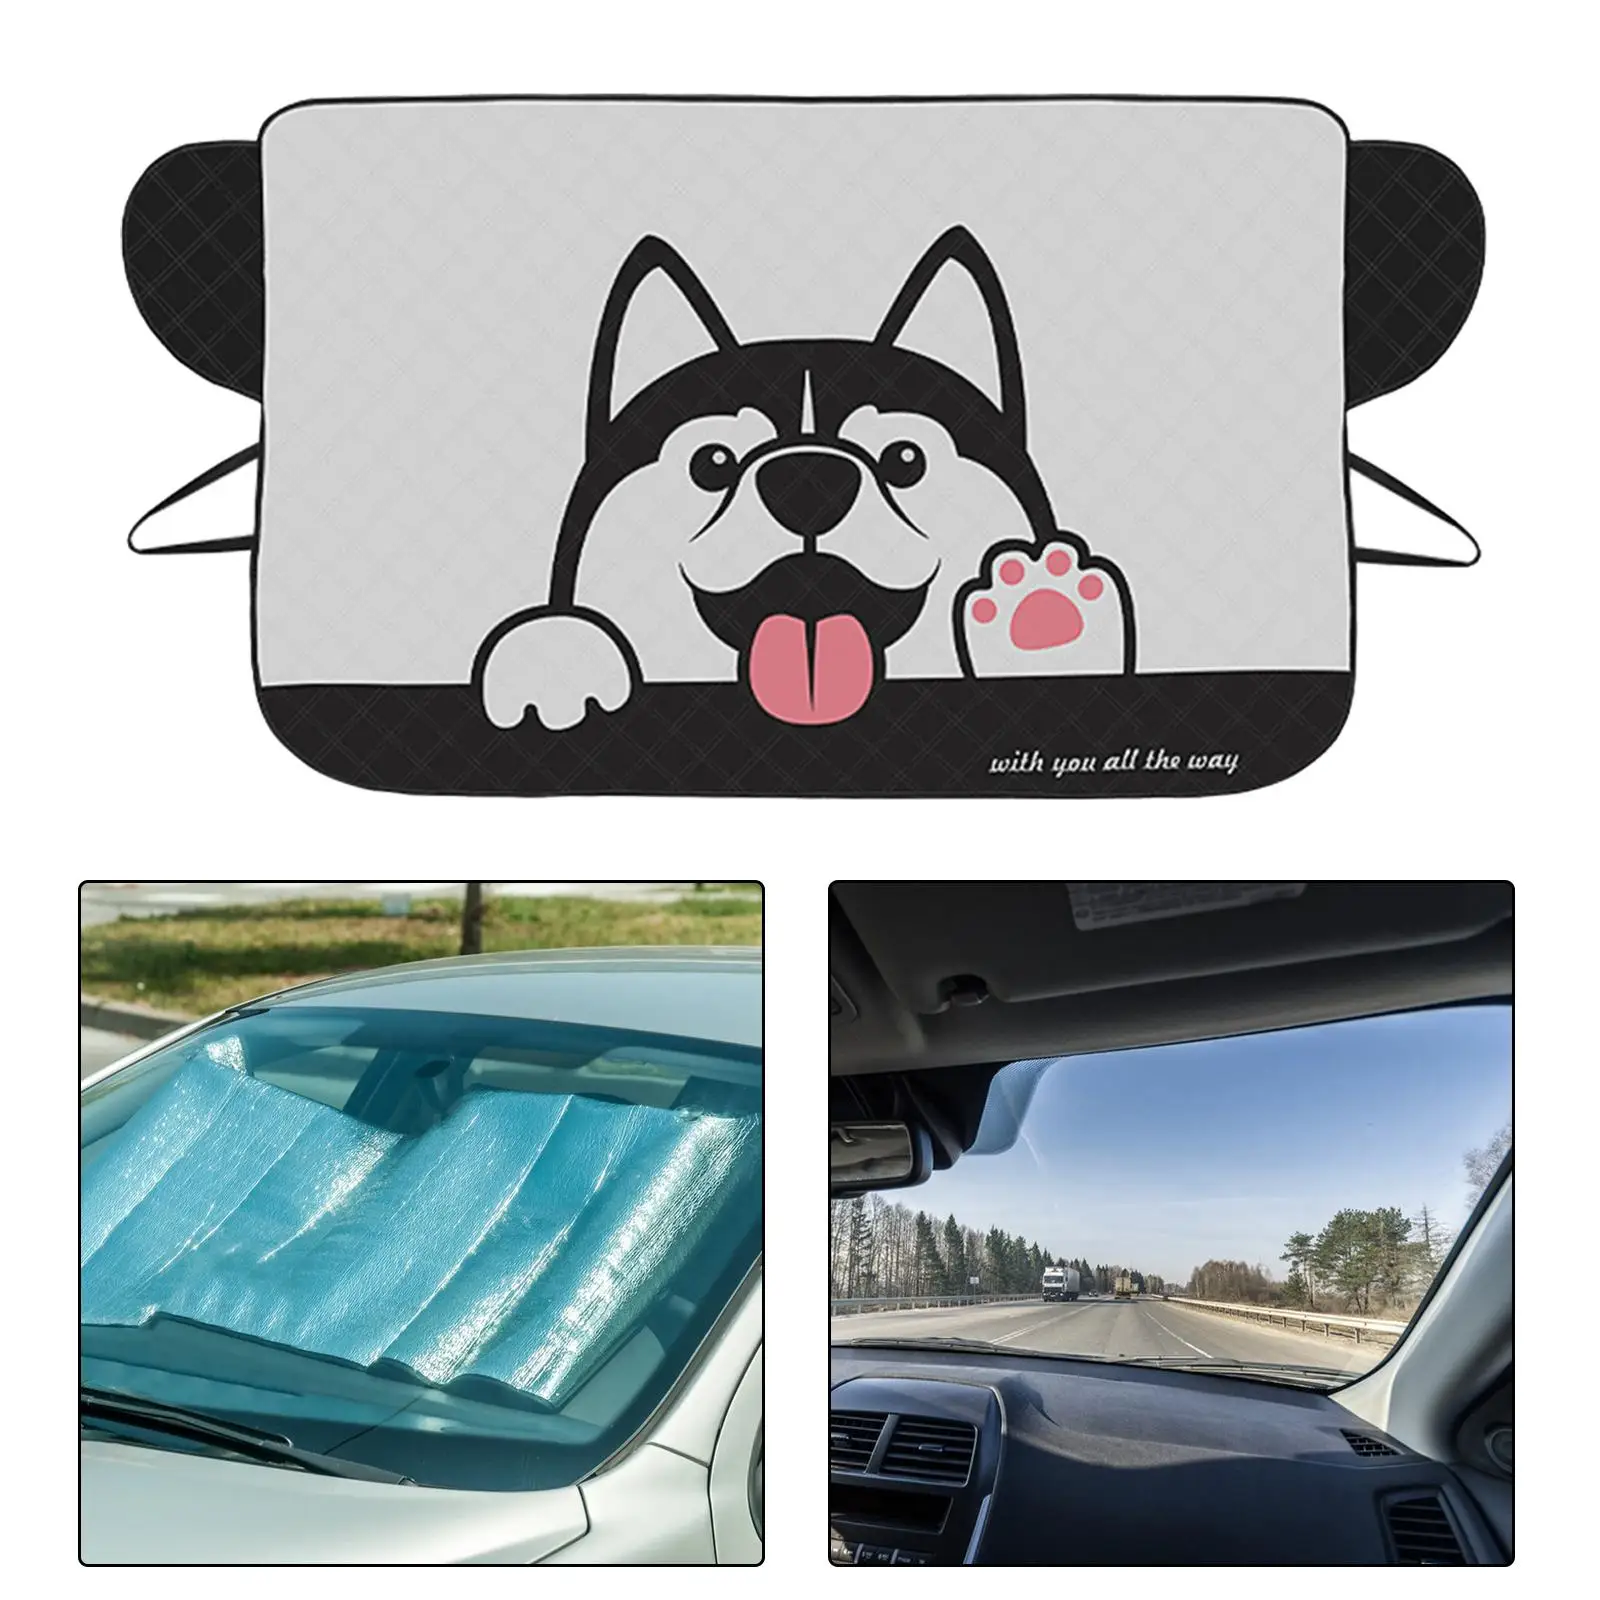 Car Windshield Snow Cover Protective Windscreen Cover for Sedan Van SUV